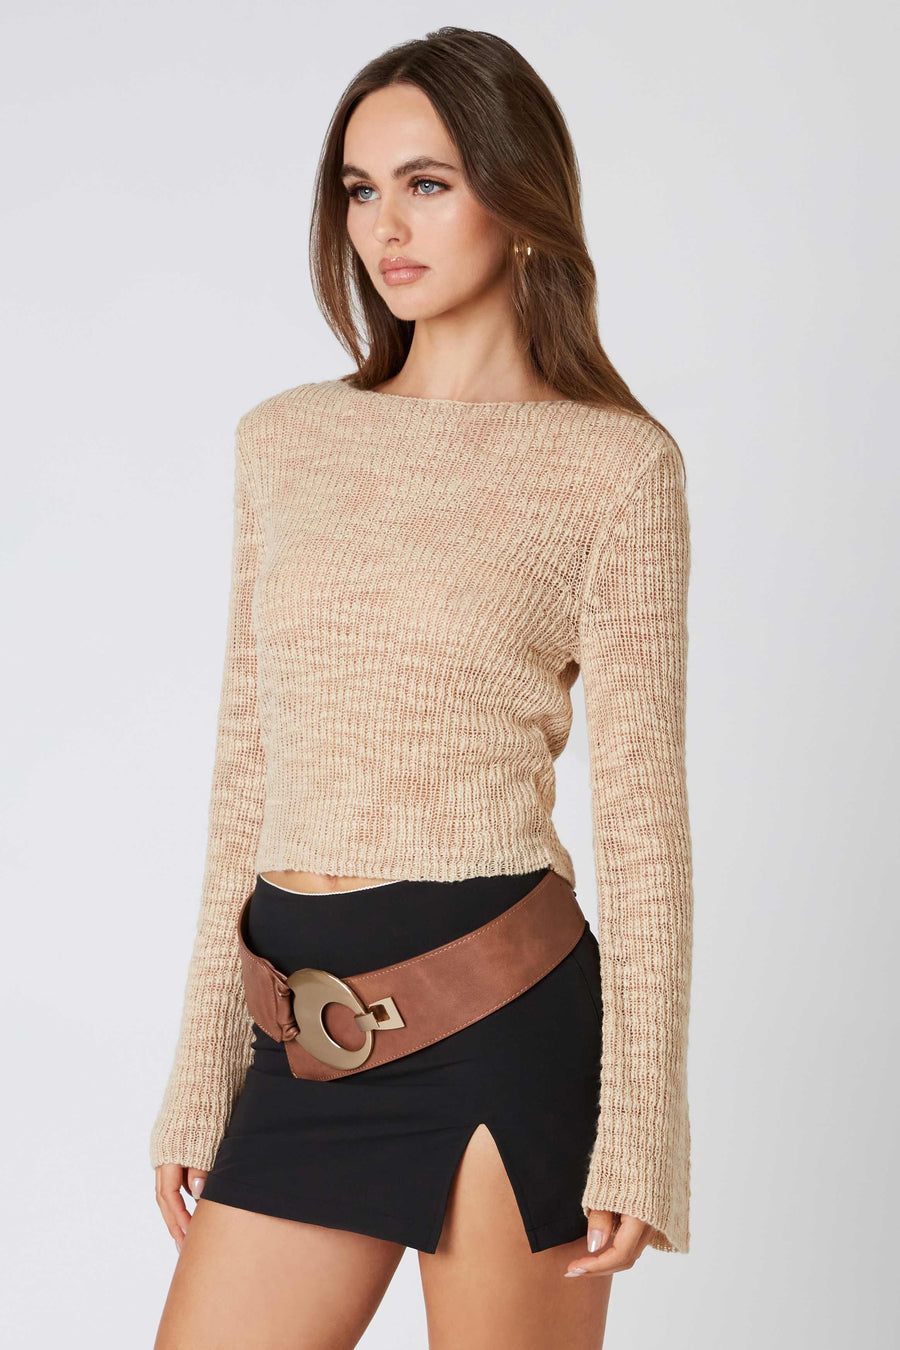 Natural long sleeve sweater.